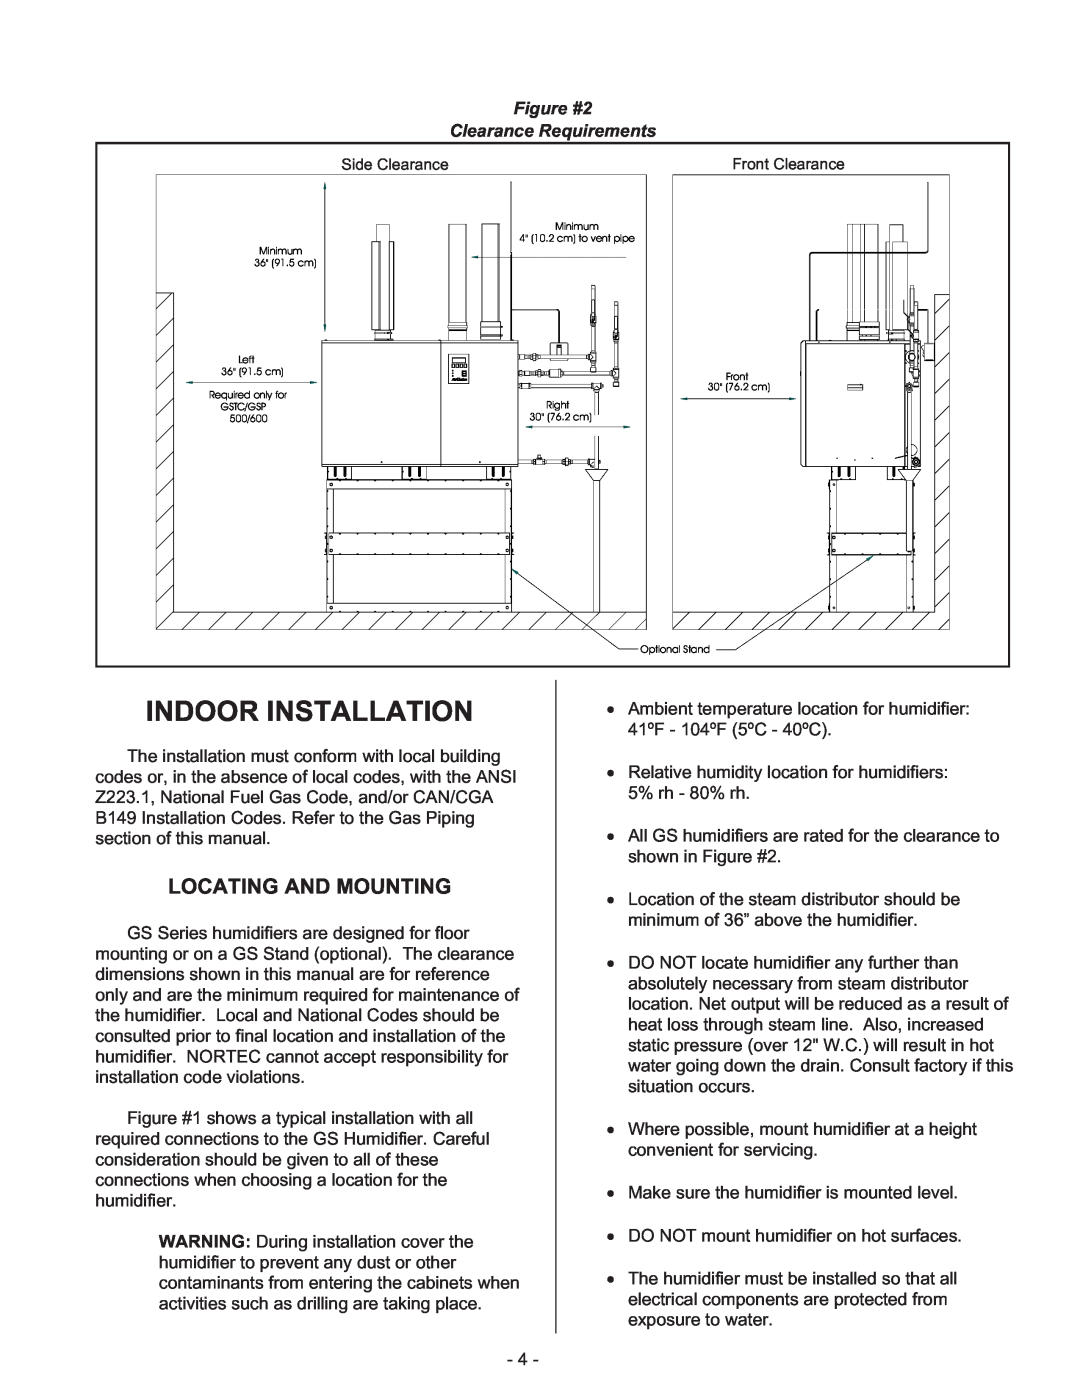 Nortec Industries GS Series manual Indoor Installation, Locating And Mounting, Figure #2 Clearance Requirements 